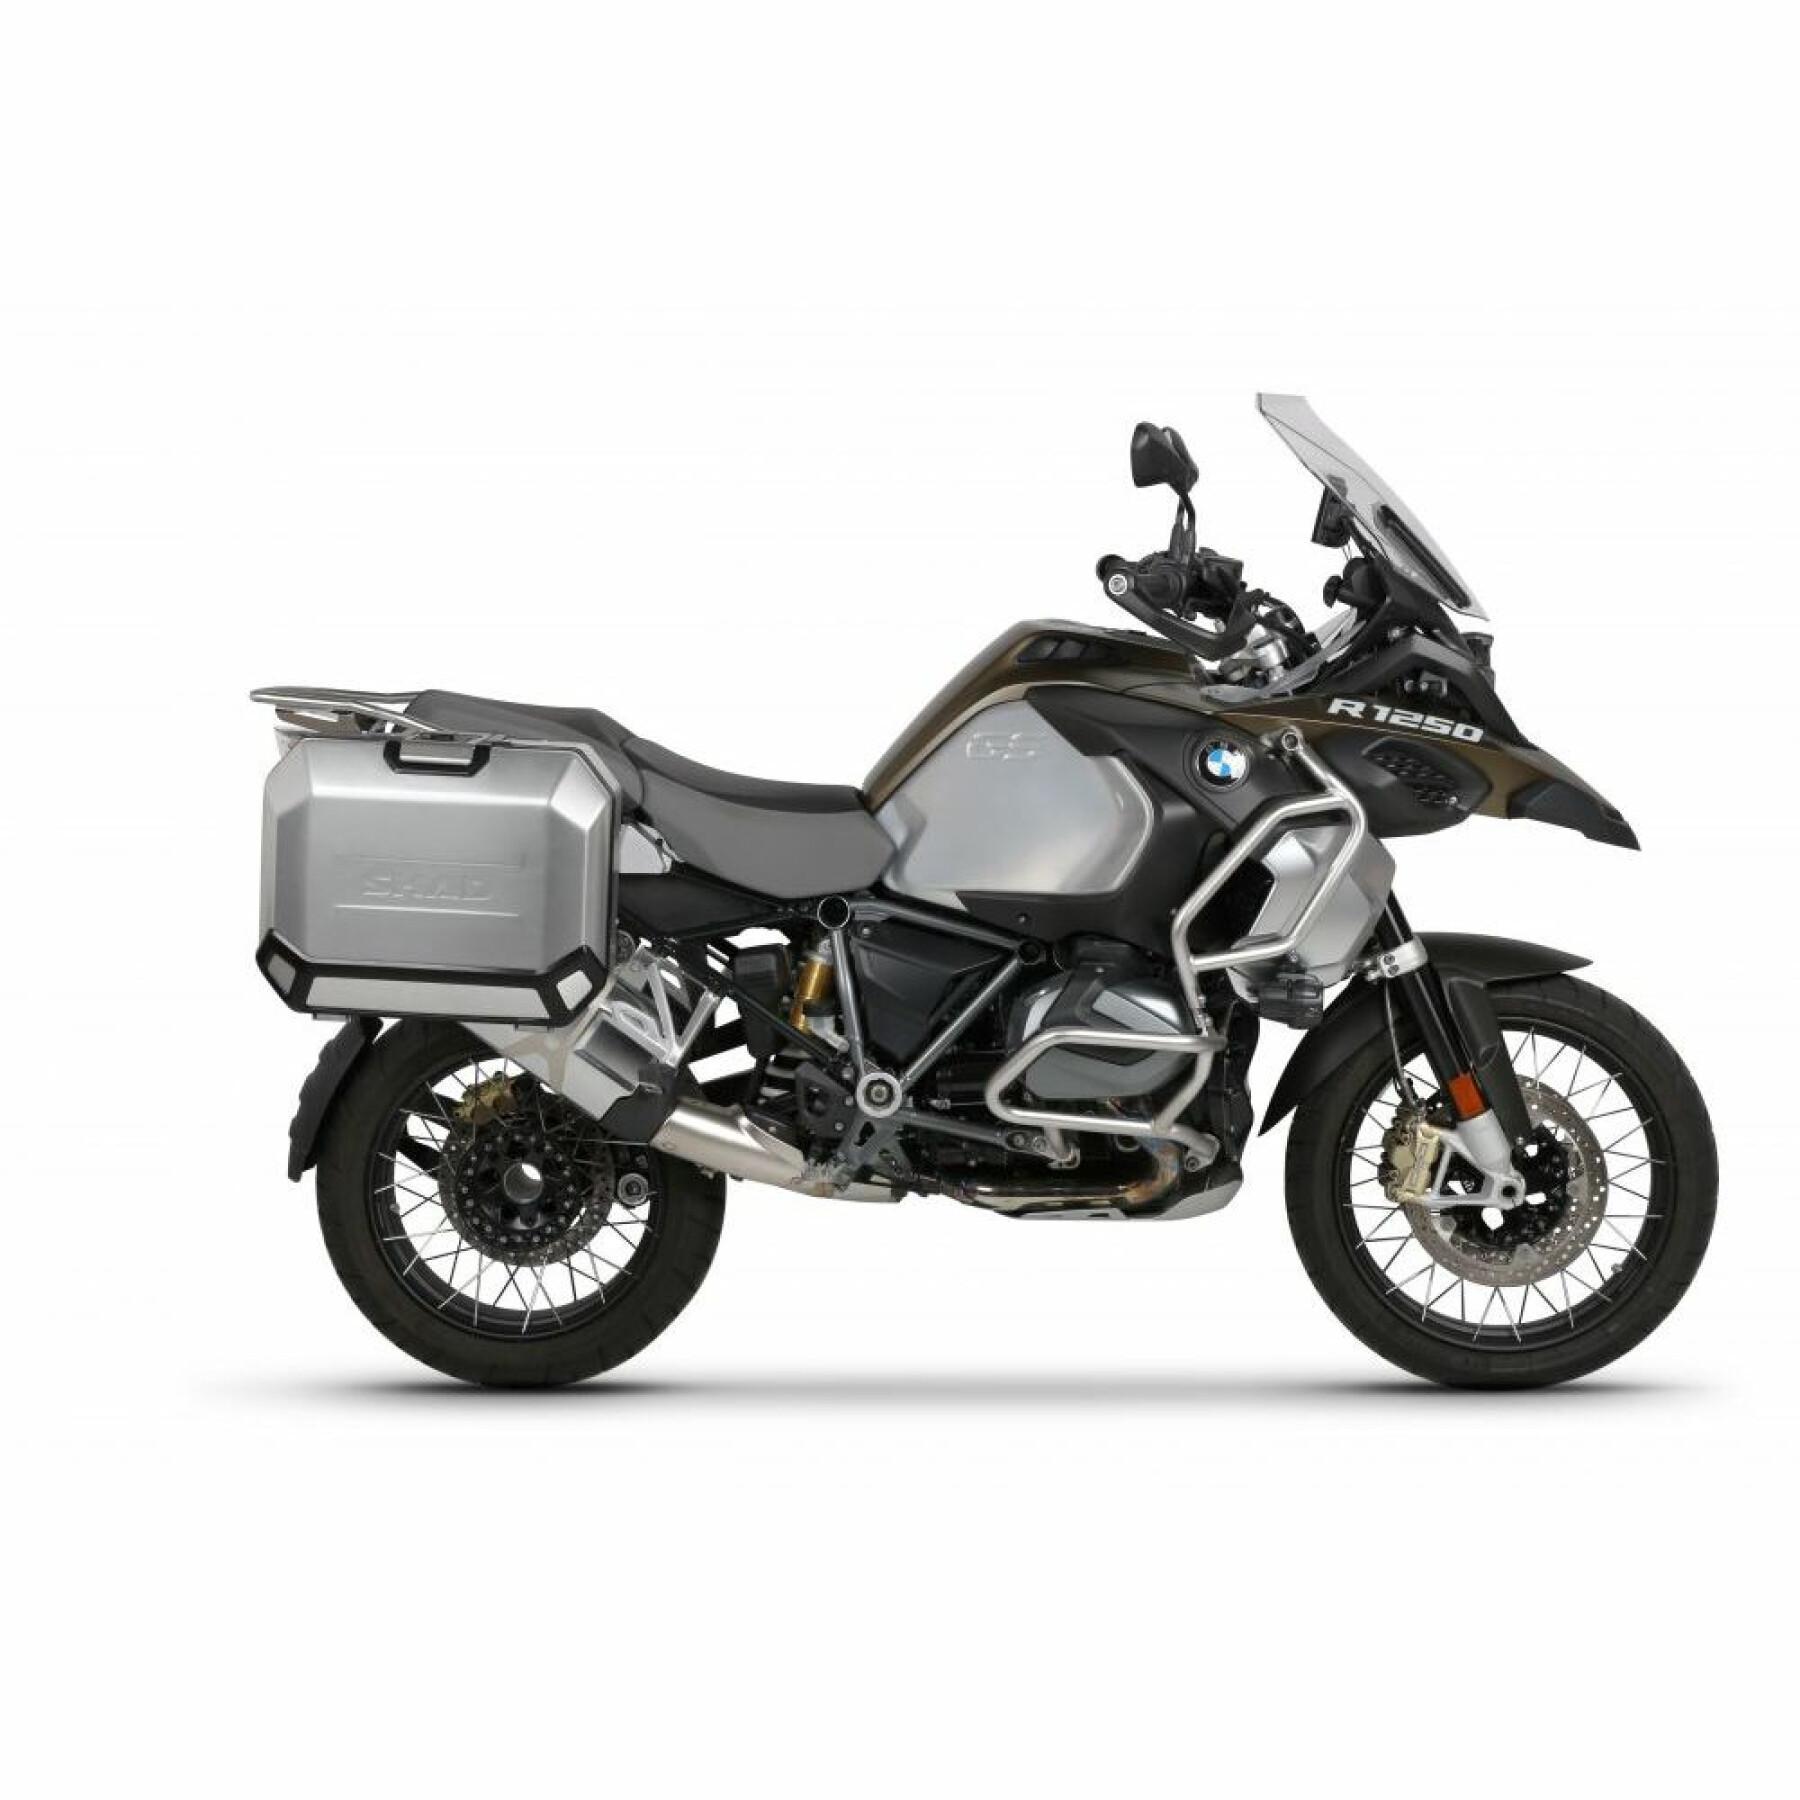 Support valises latérales Shad 4P System Bmw R1200/R1250Gs Adventure